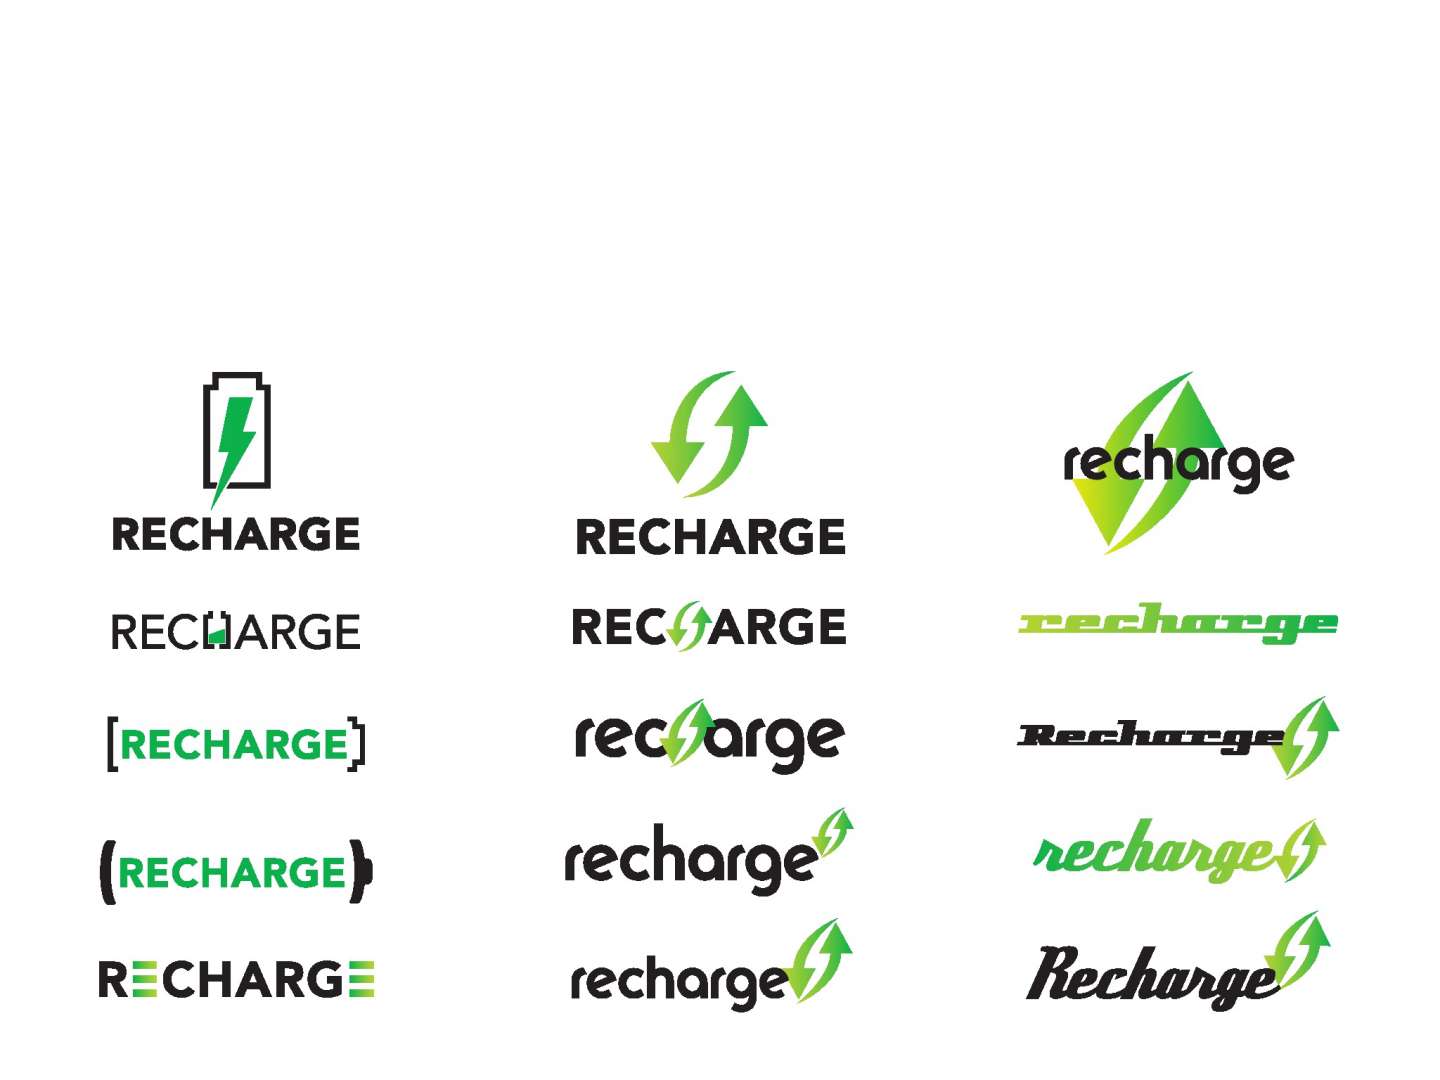 RECHARGE – Public Charging Stations